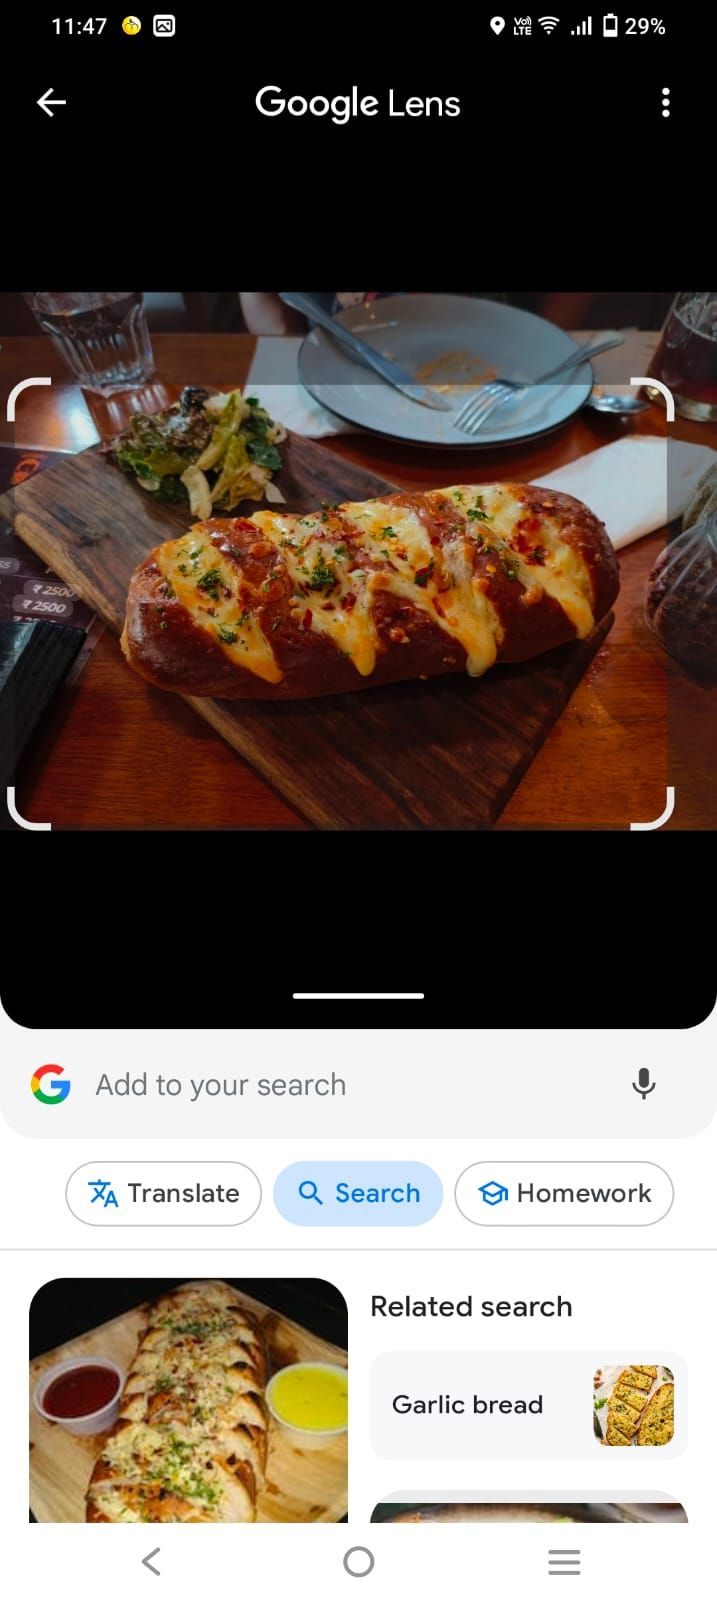 Image shows Google Lens search after selecting a saved photo of garlic bread. Related search results are shown at the bottom of the screen.